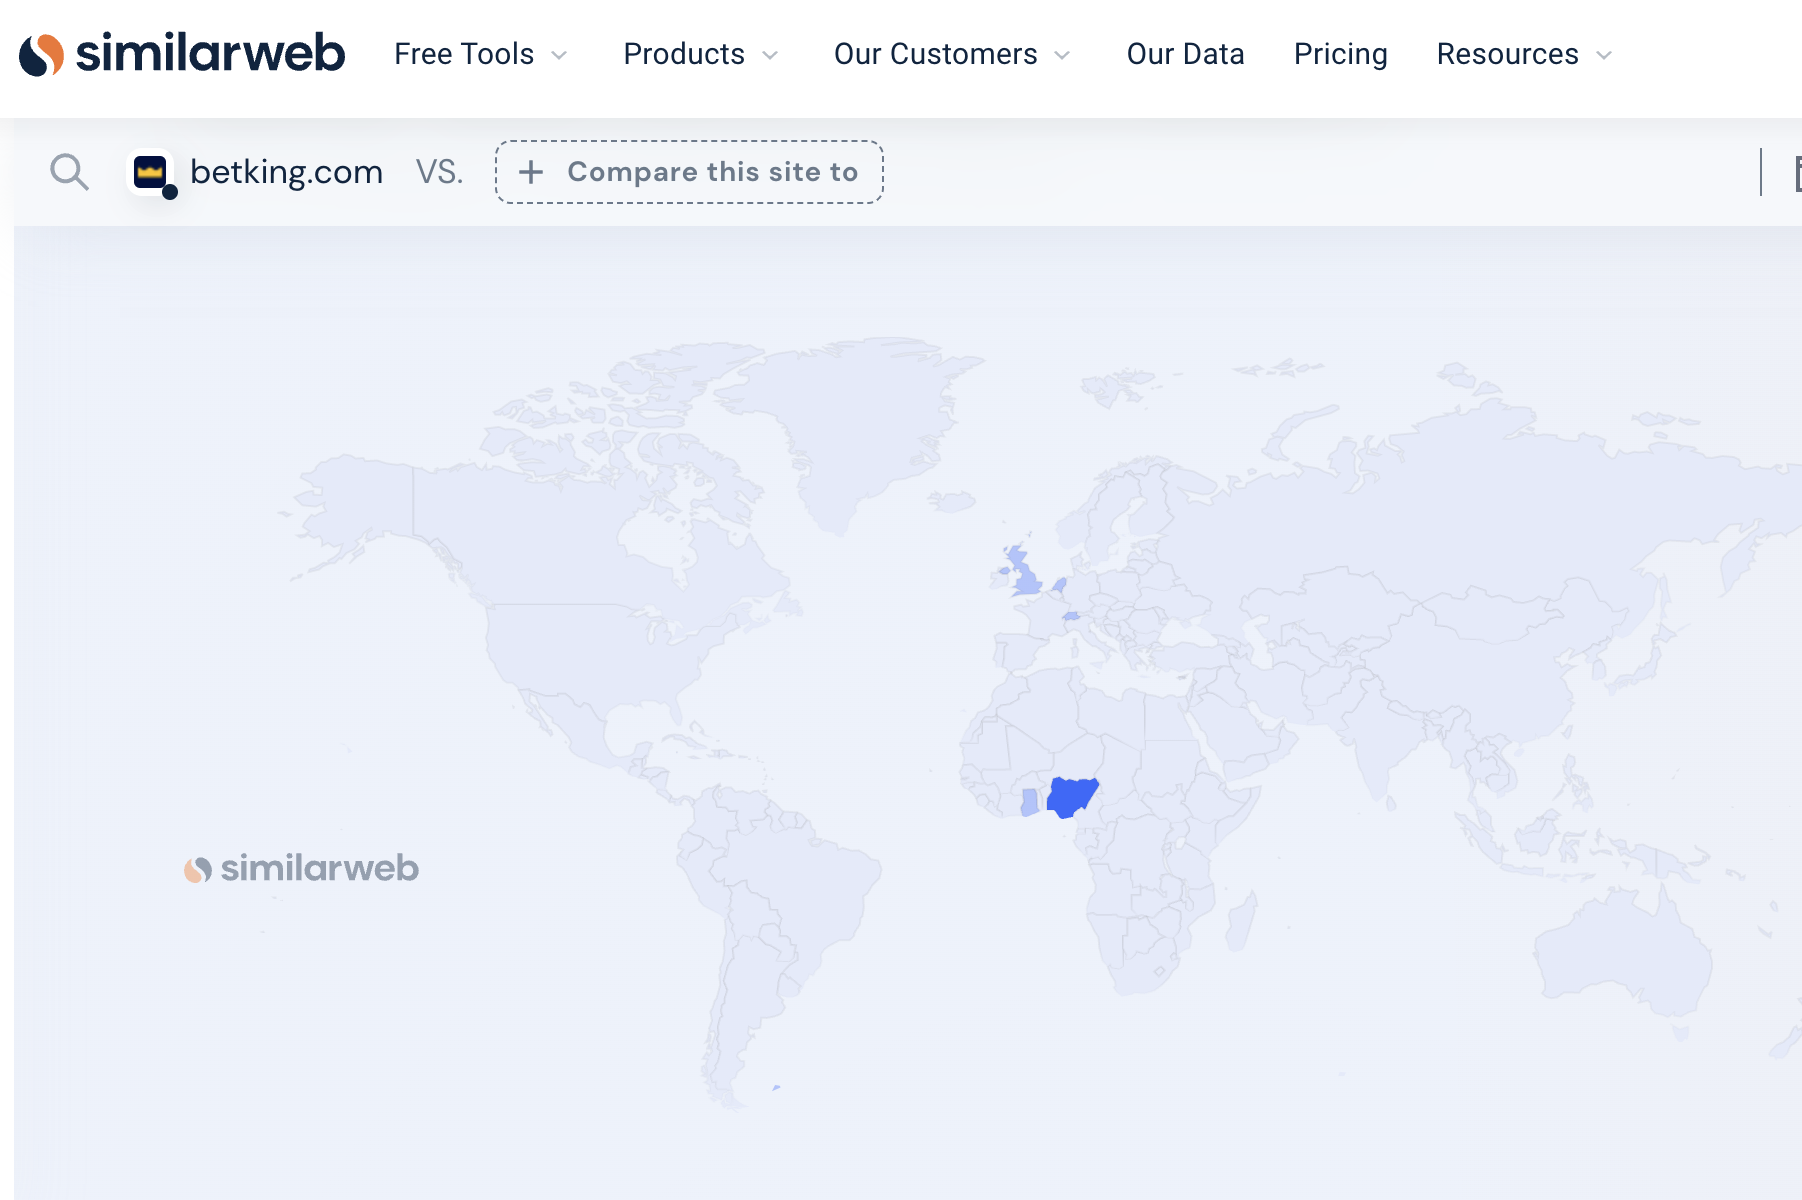 Data from the analytical service SimilarWeb